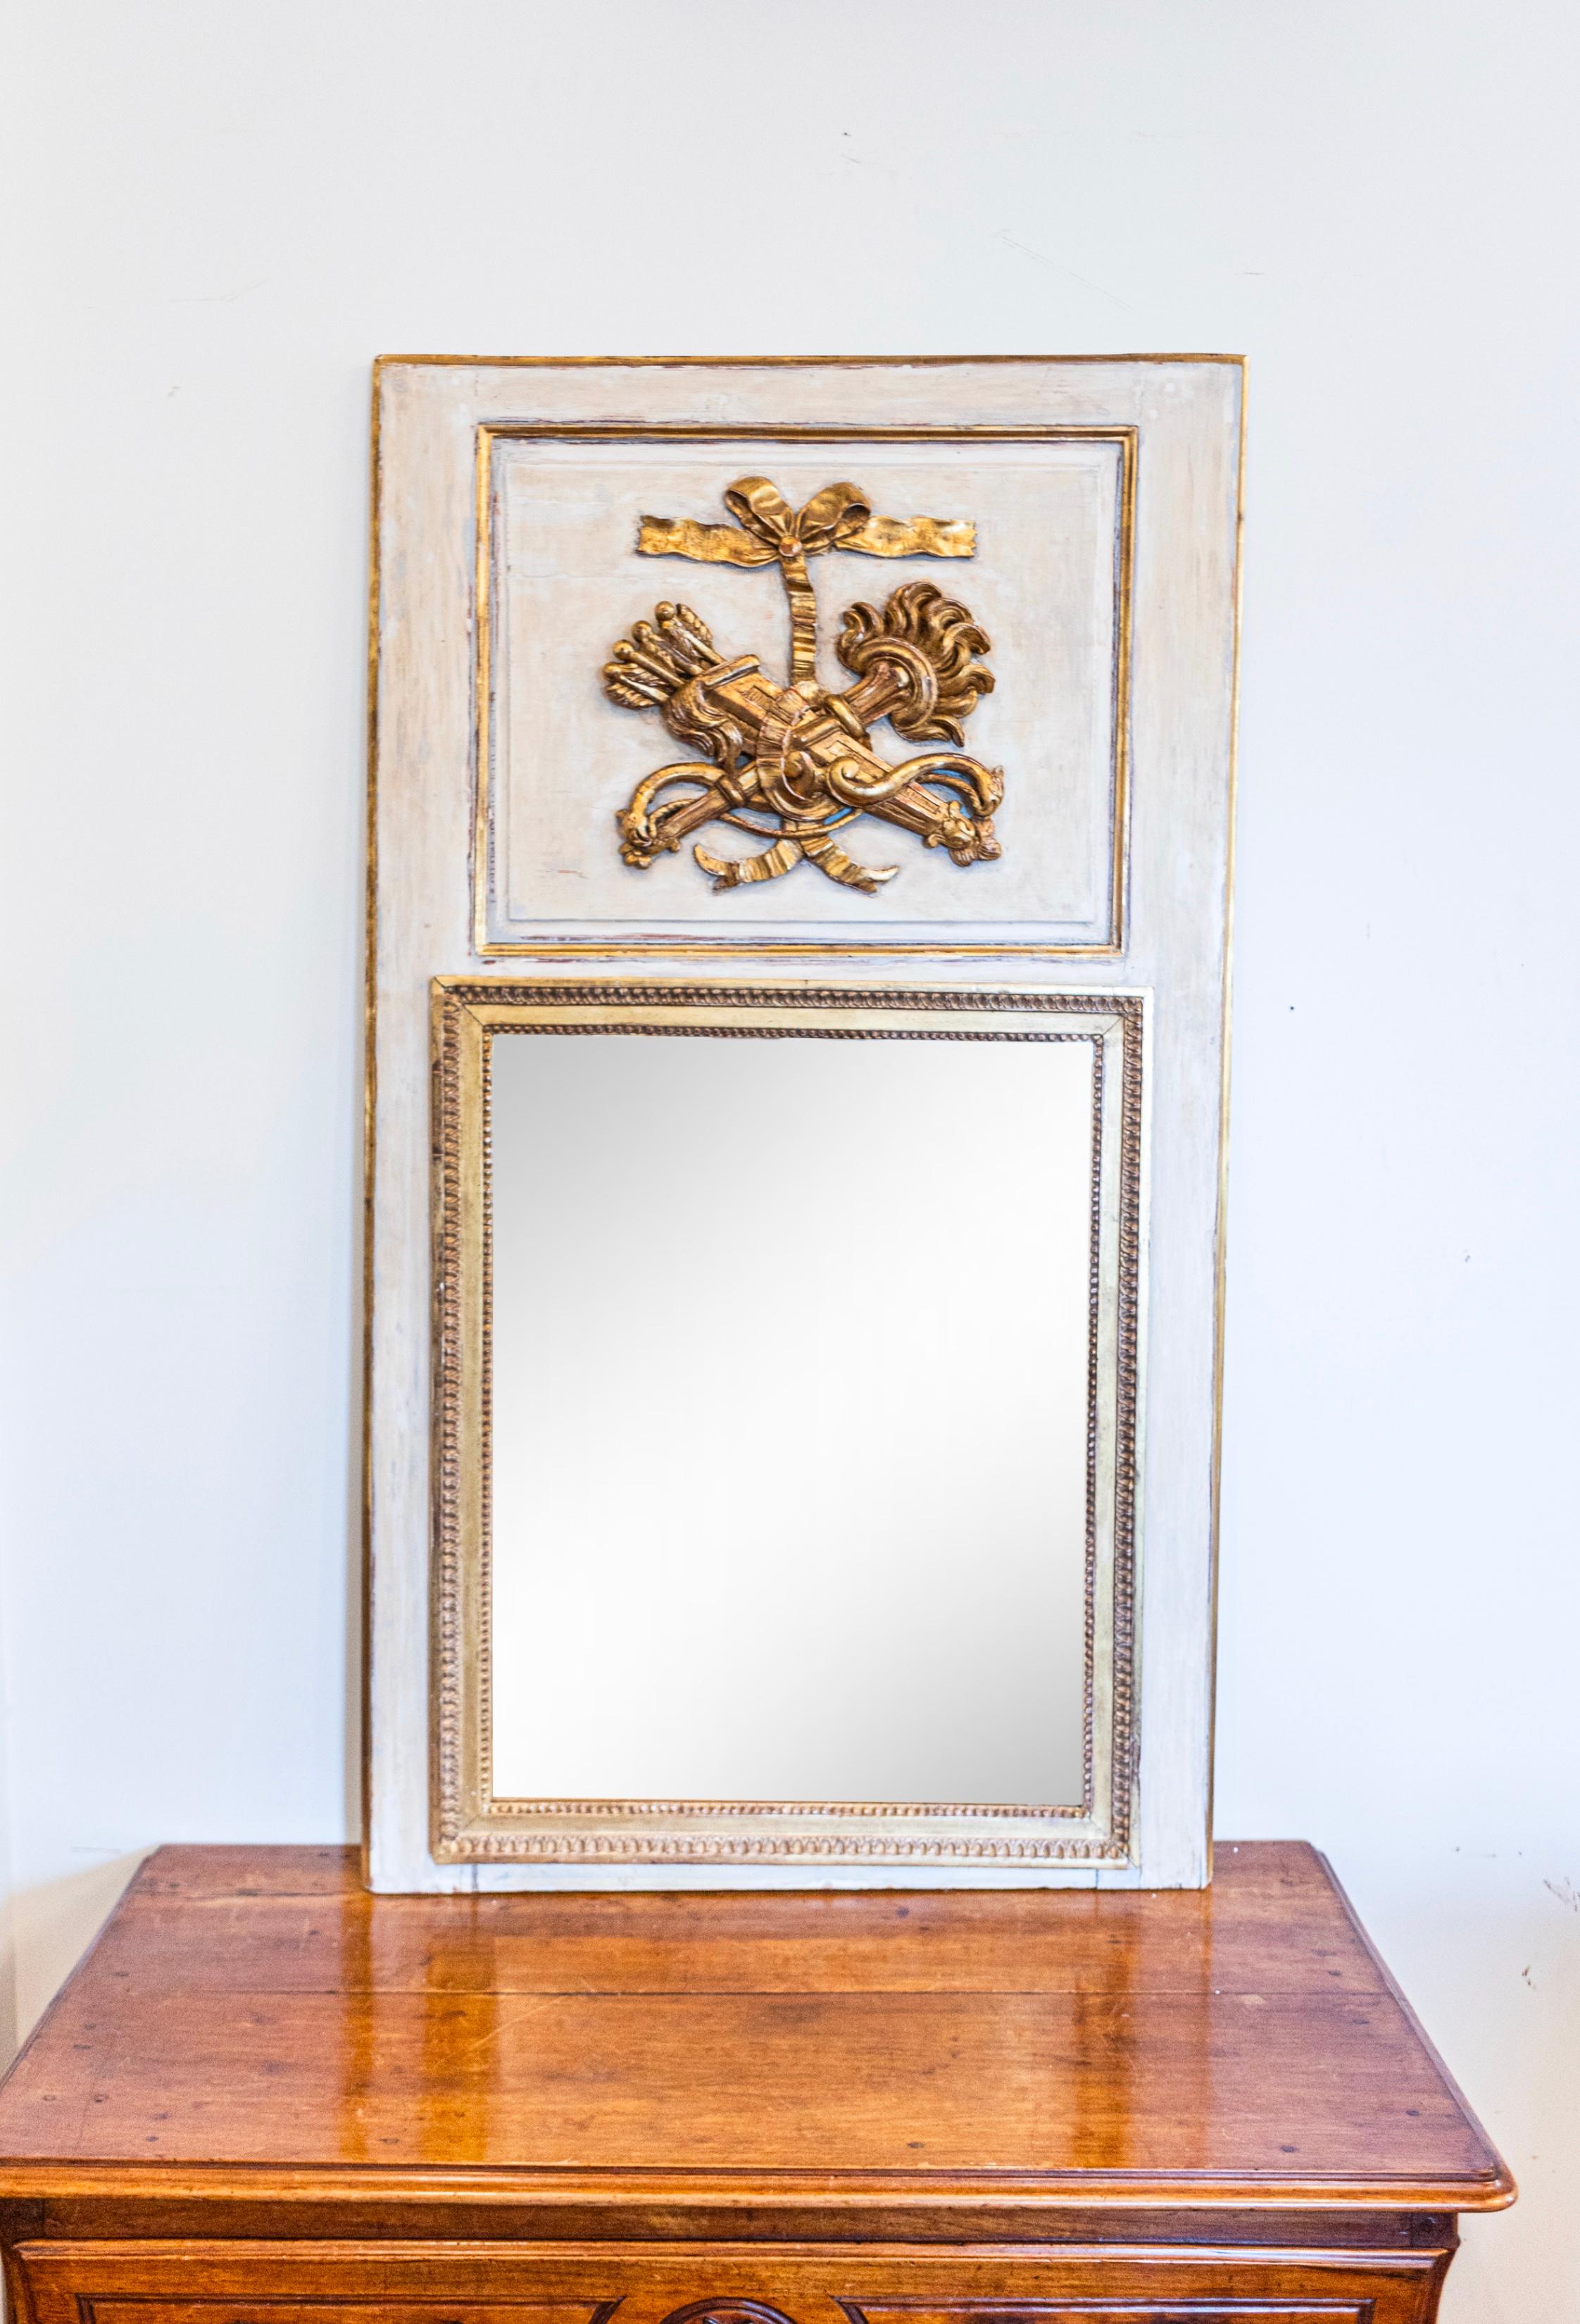 A French Louis XVI period gray painted and gilded trumeau mirror from circa 1790 with carved torch and quiver motif. This exquisite French Louis XVI period trumeau mirror, dating back to circa 1790, is a masterpiece of classic design and romantic